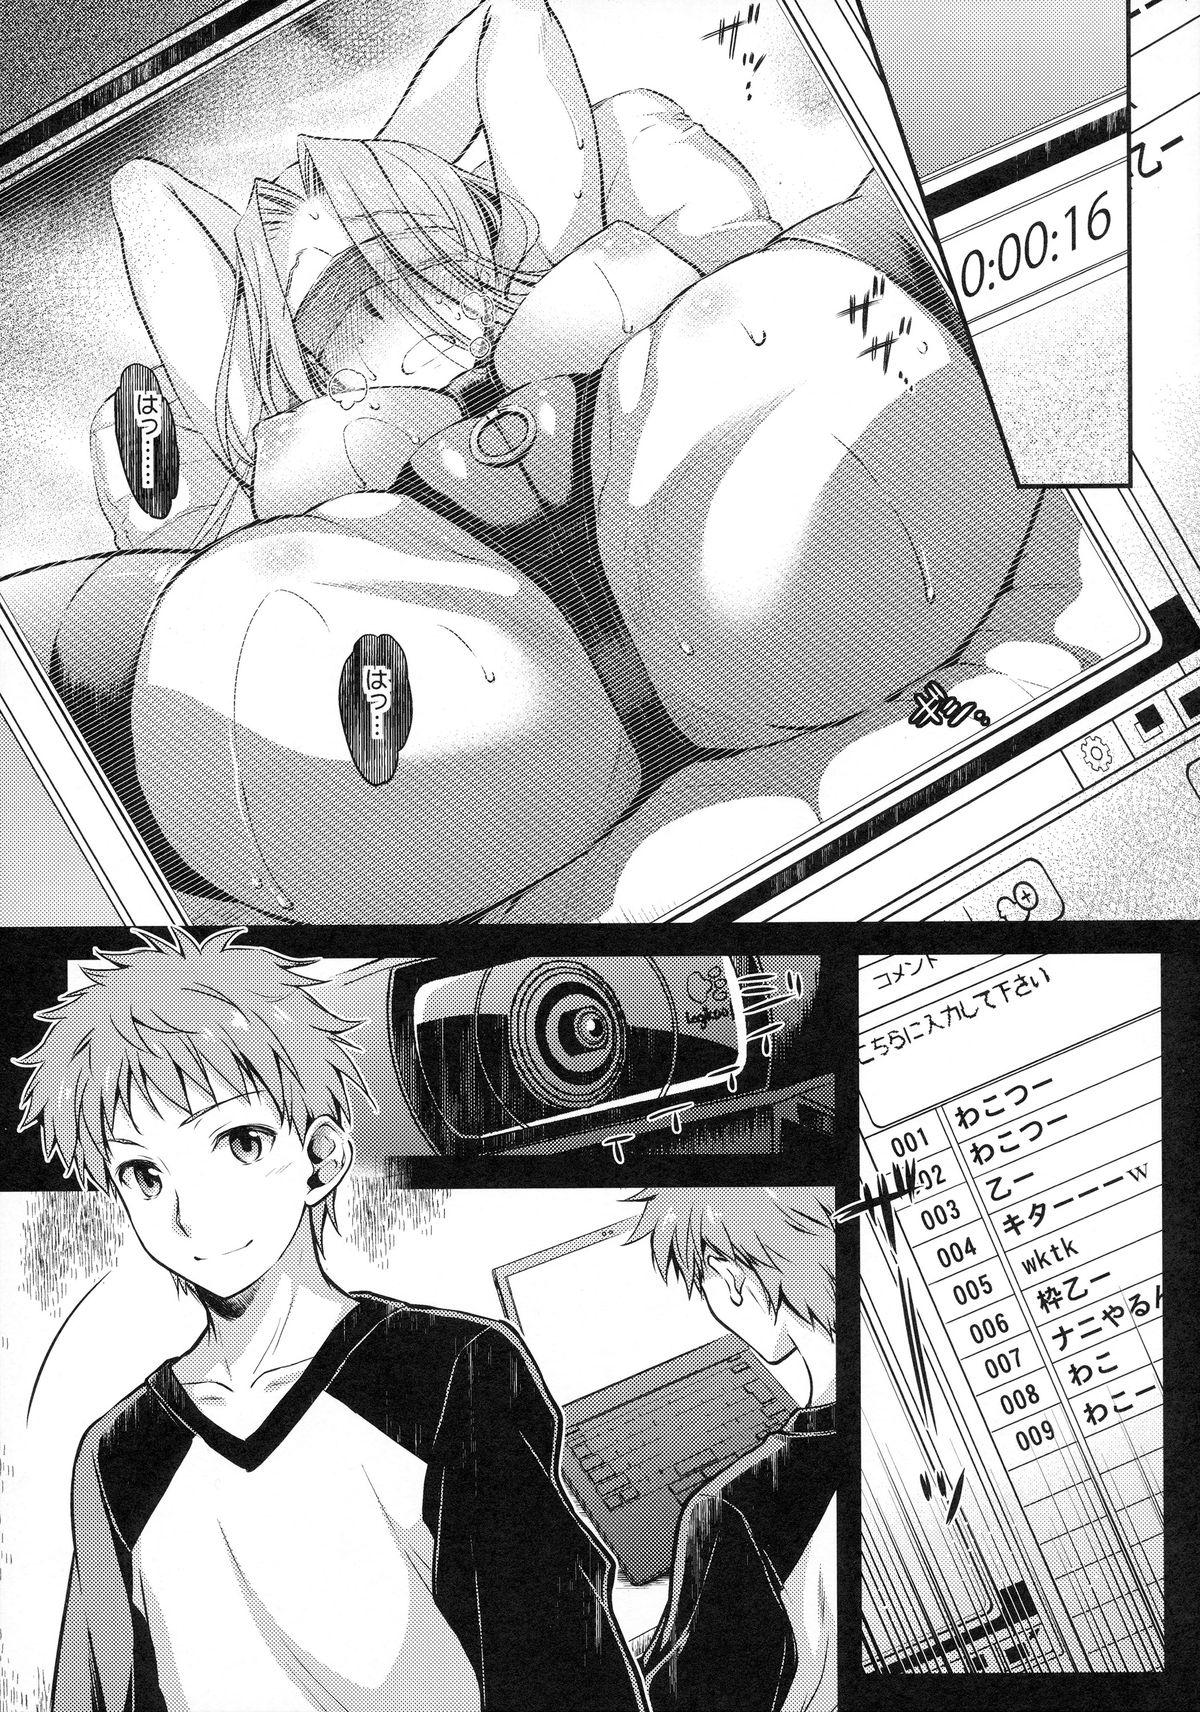 Kissing R.O.D 9 - Fate stay night Fate hollow ataraxia Cdmx - Page 8